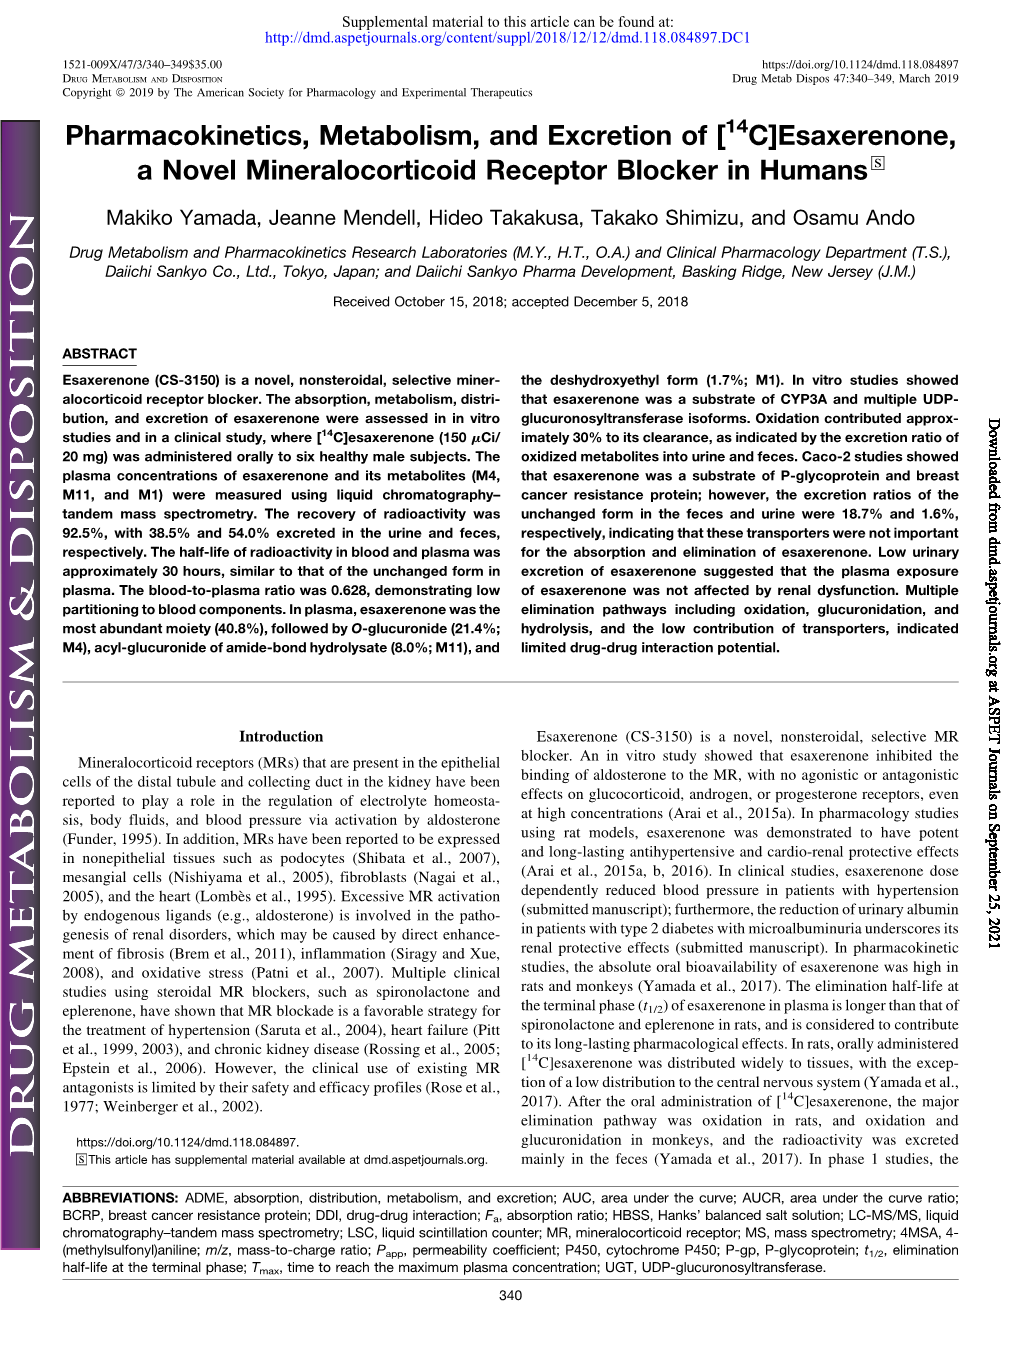 Pharmacokinetics, Metabolism, and Excretion of [14C]Esaxerenone, a Novel Mineralocorticoid Receptor Blocker in Humans S